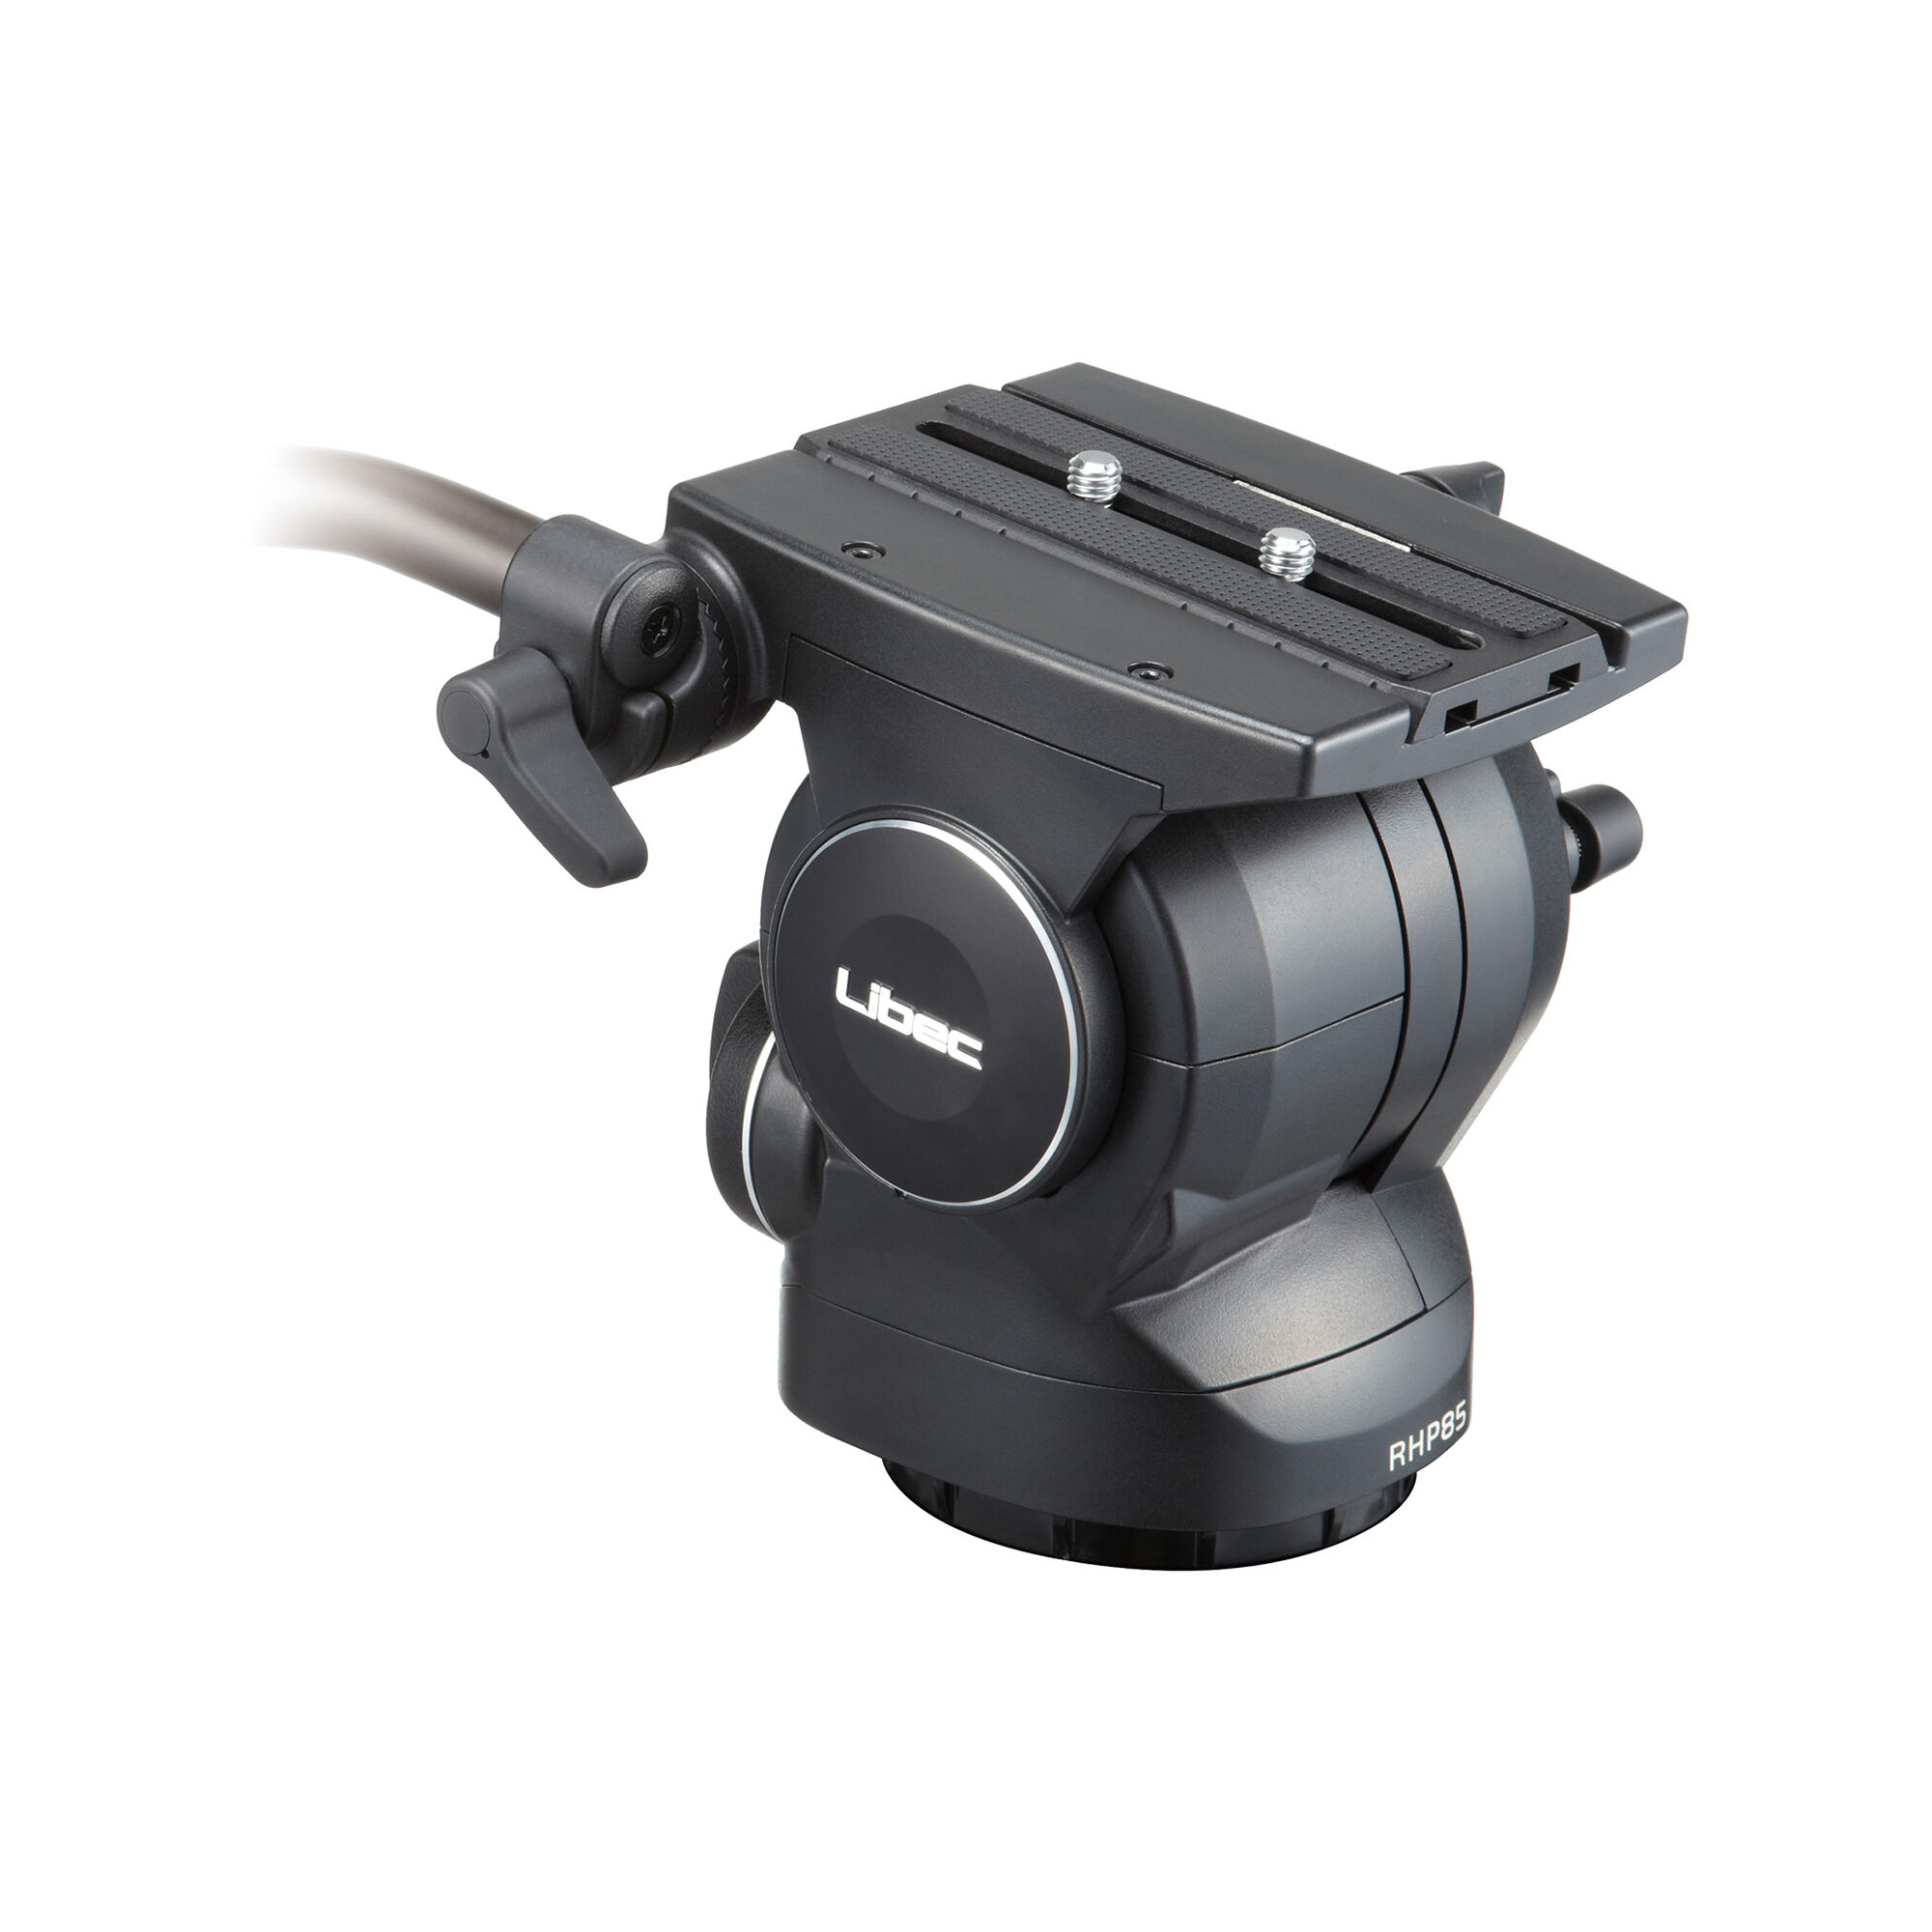 Libec 100mm ball video head with a PH-8B, payload 25kg